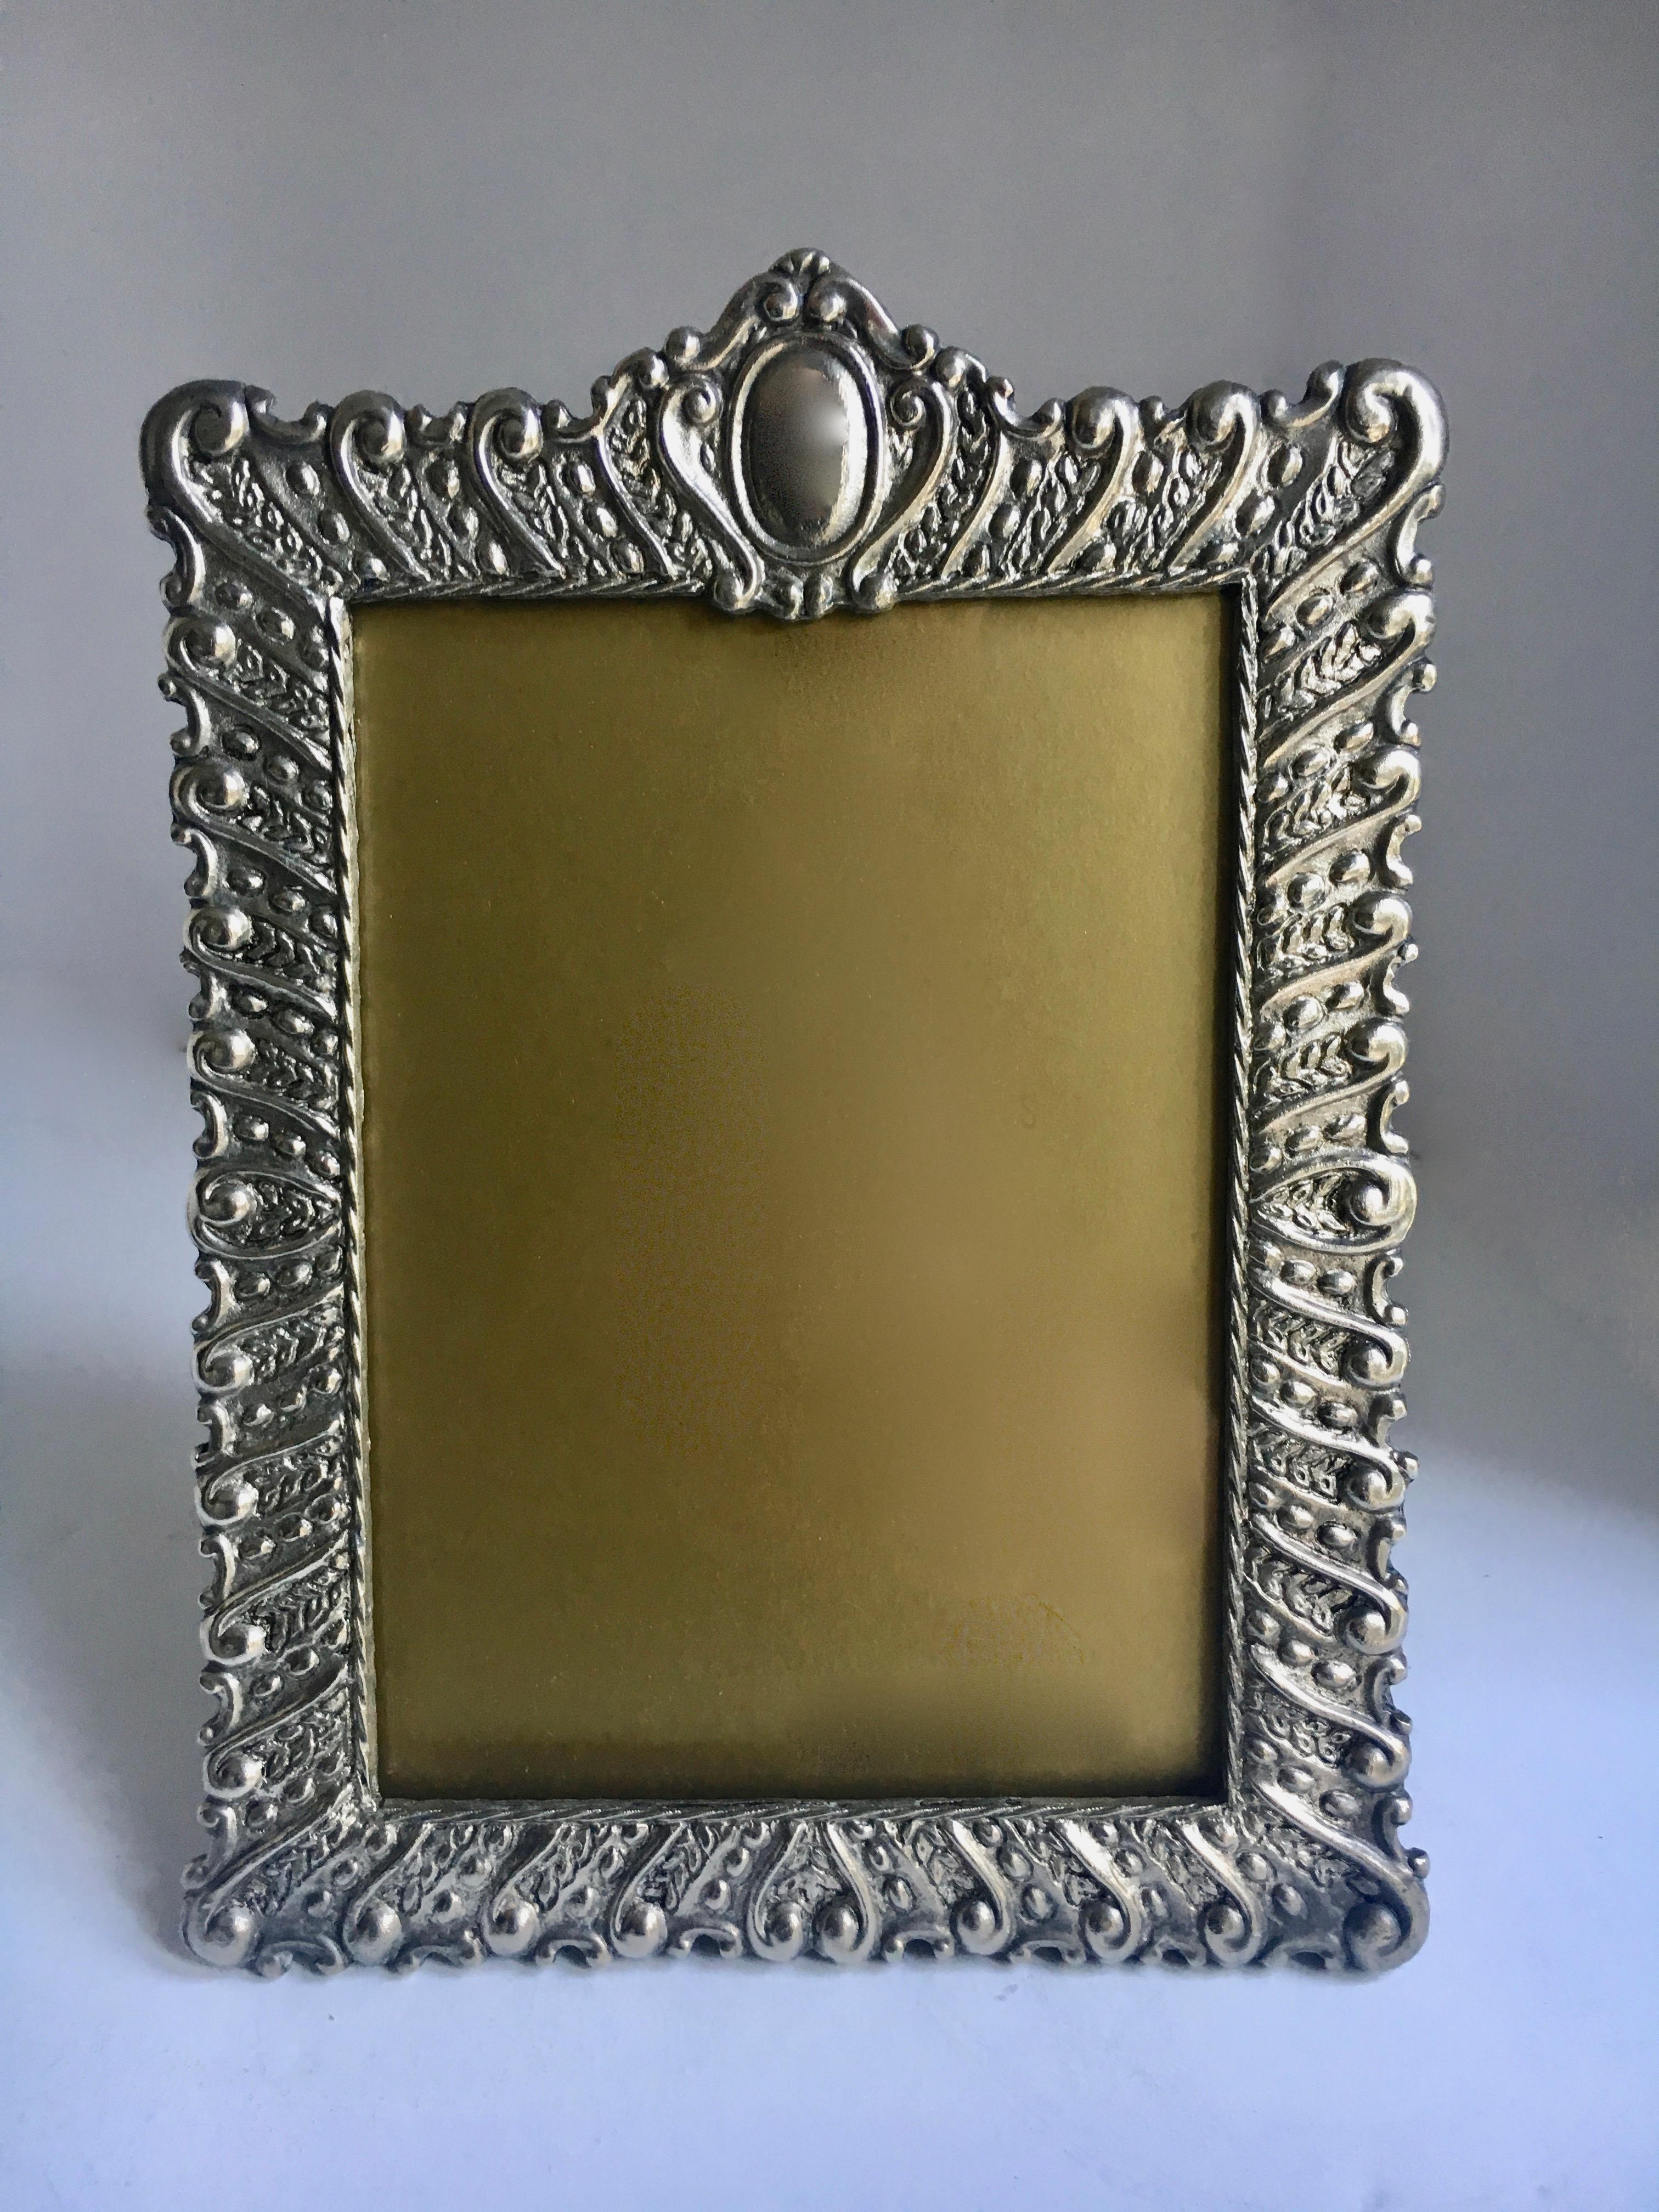 Silver plate 5 x 7 picture frame - a remarkable pattern surround - silver plate.. handsome for a masculine or feminine setting - desk or shelf.